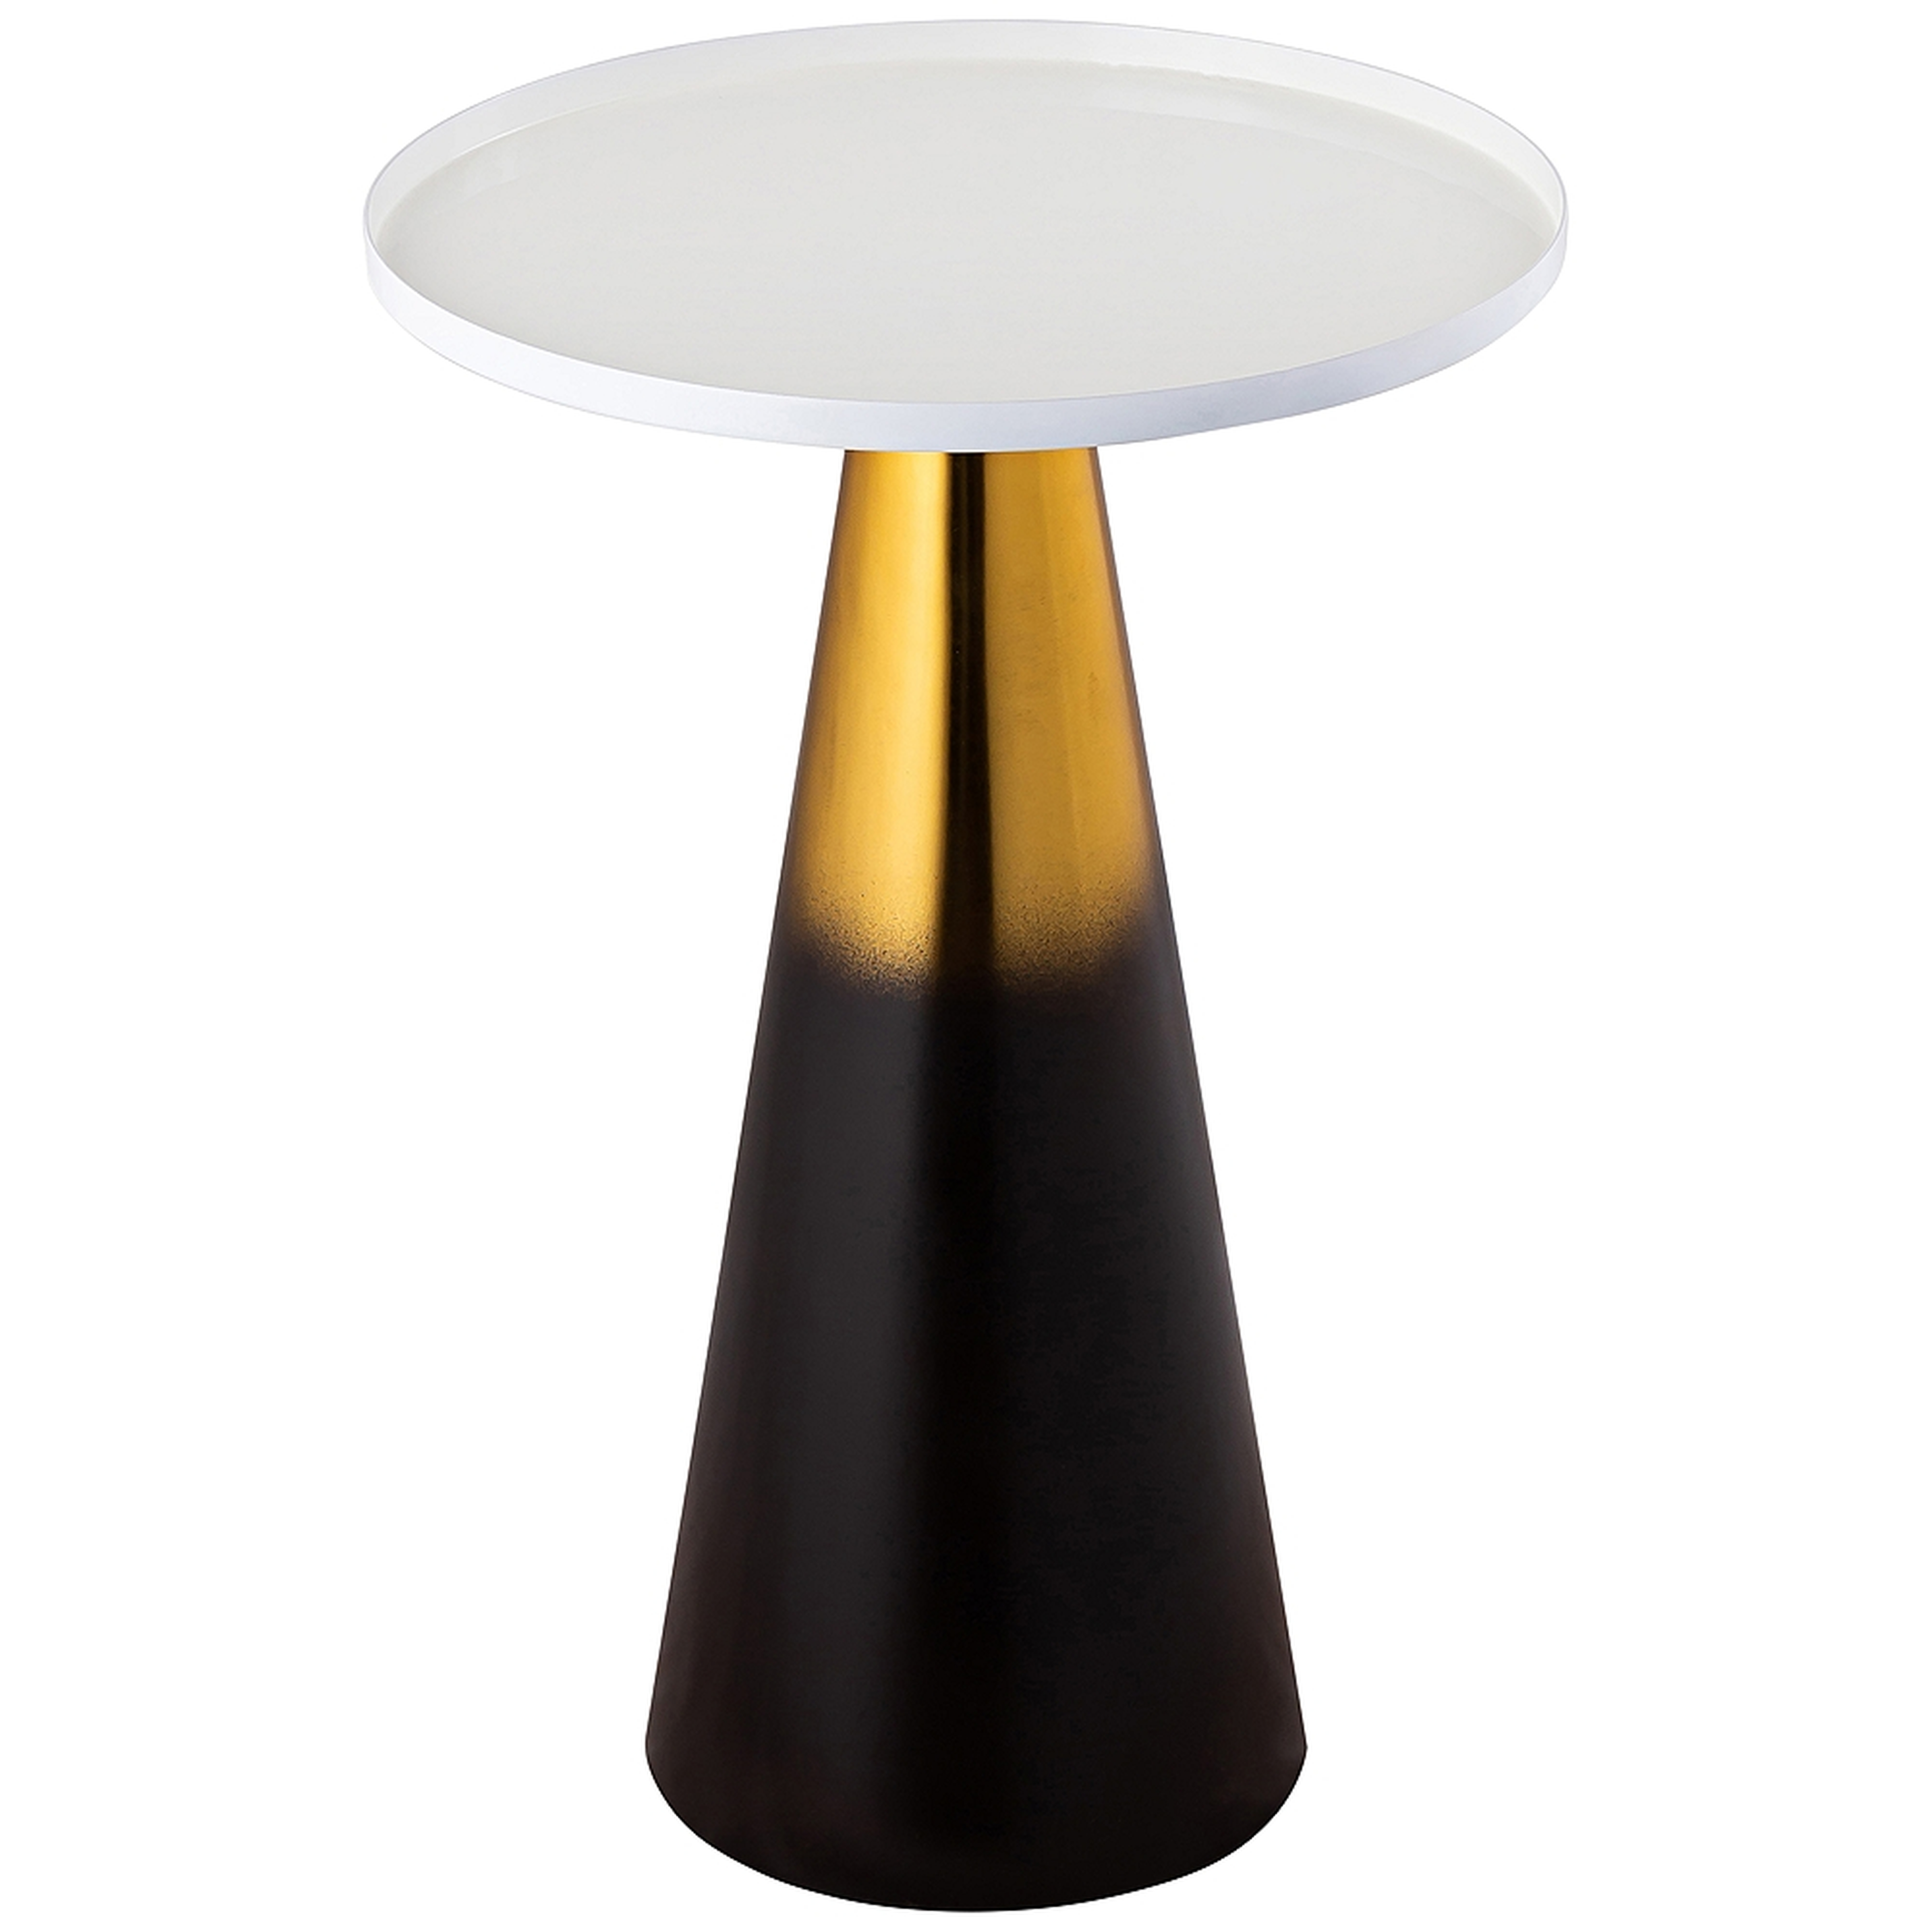 Ombre Enamel 15 3/4" Wide White and Gold Round Side Table - Style # 93D74 - Lamps Plus